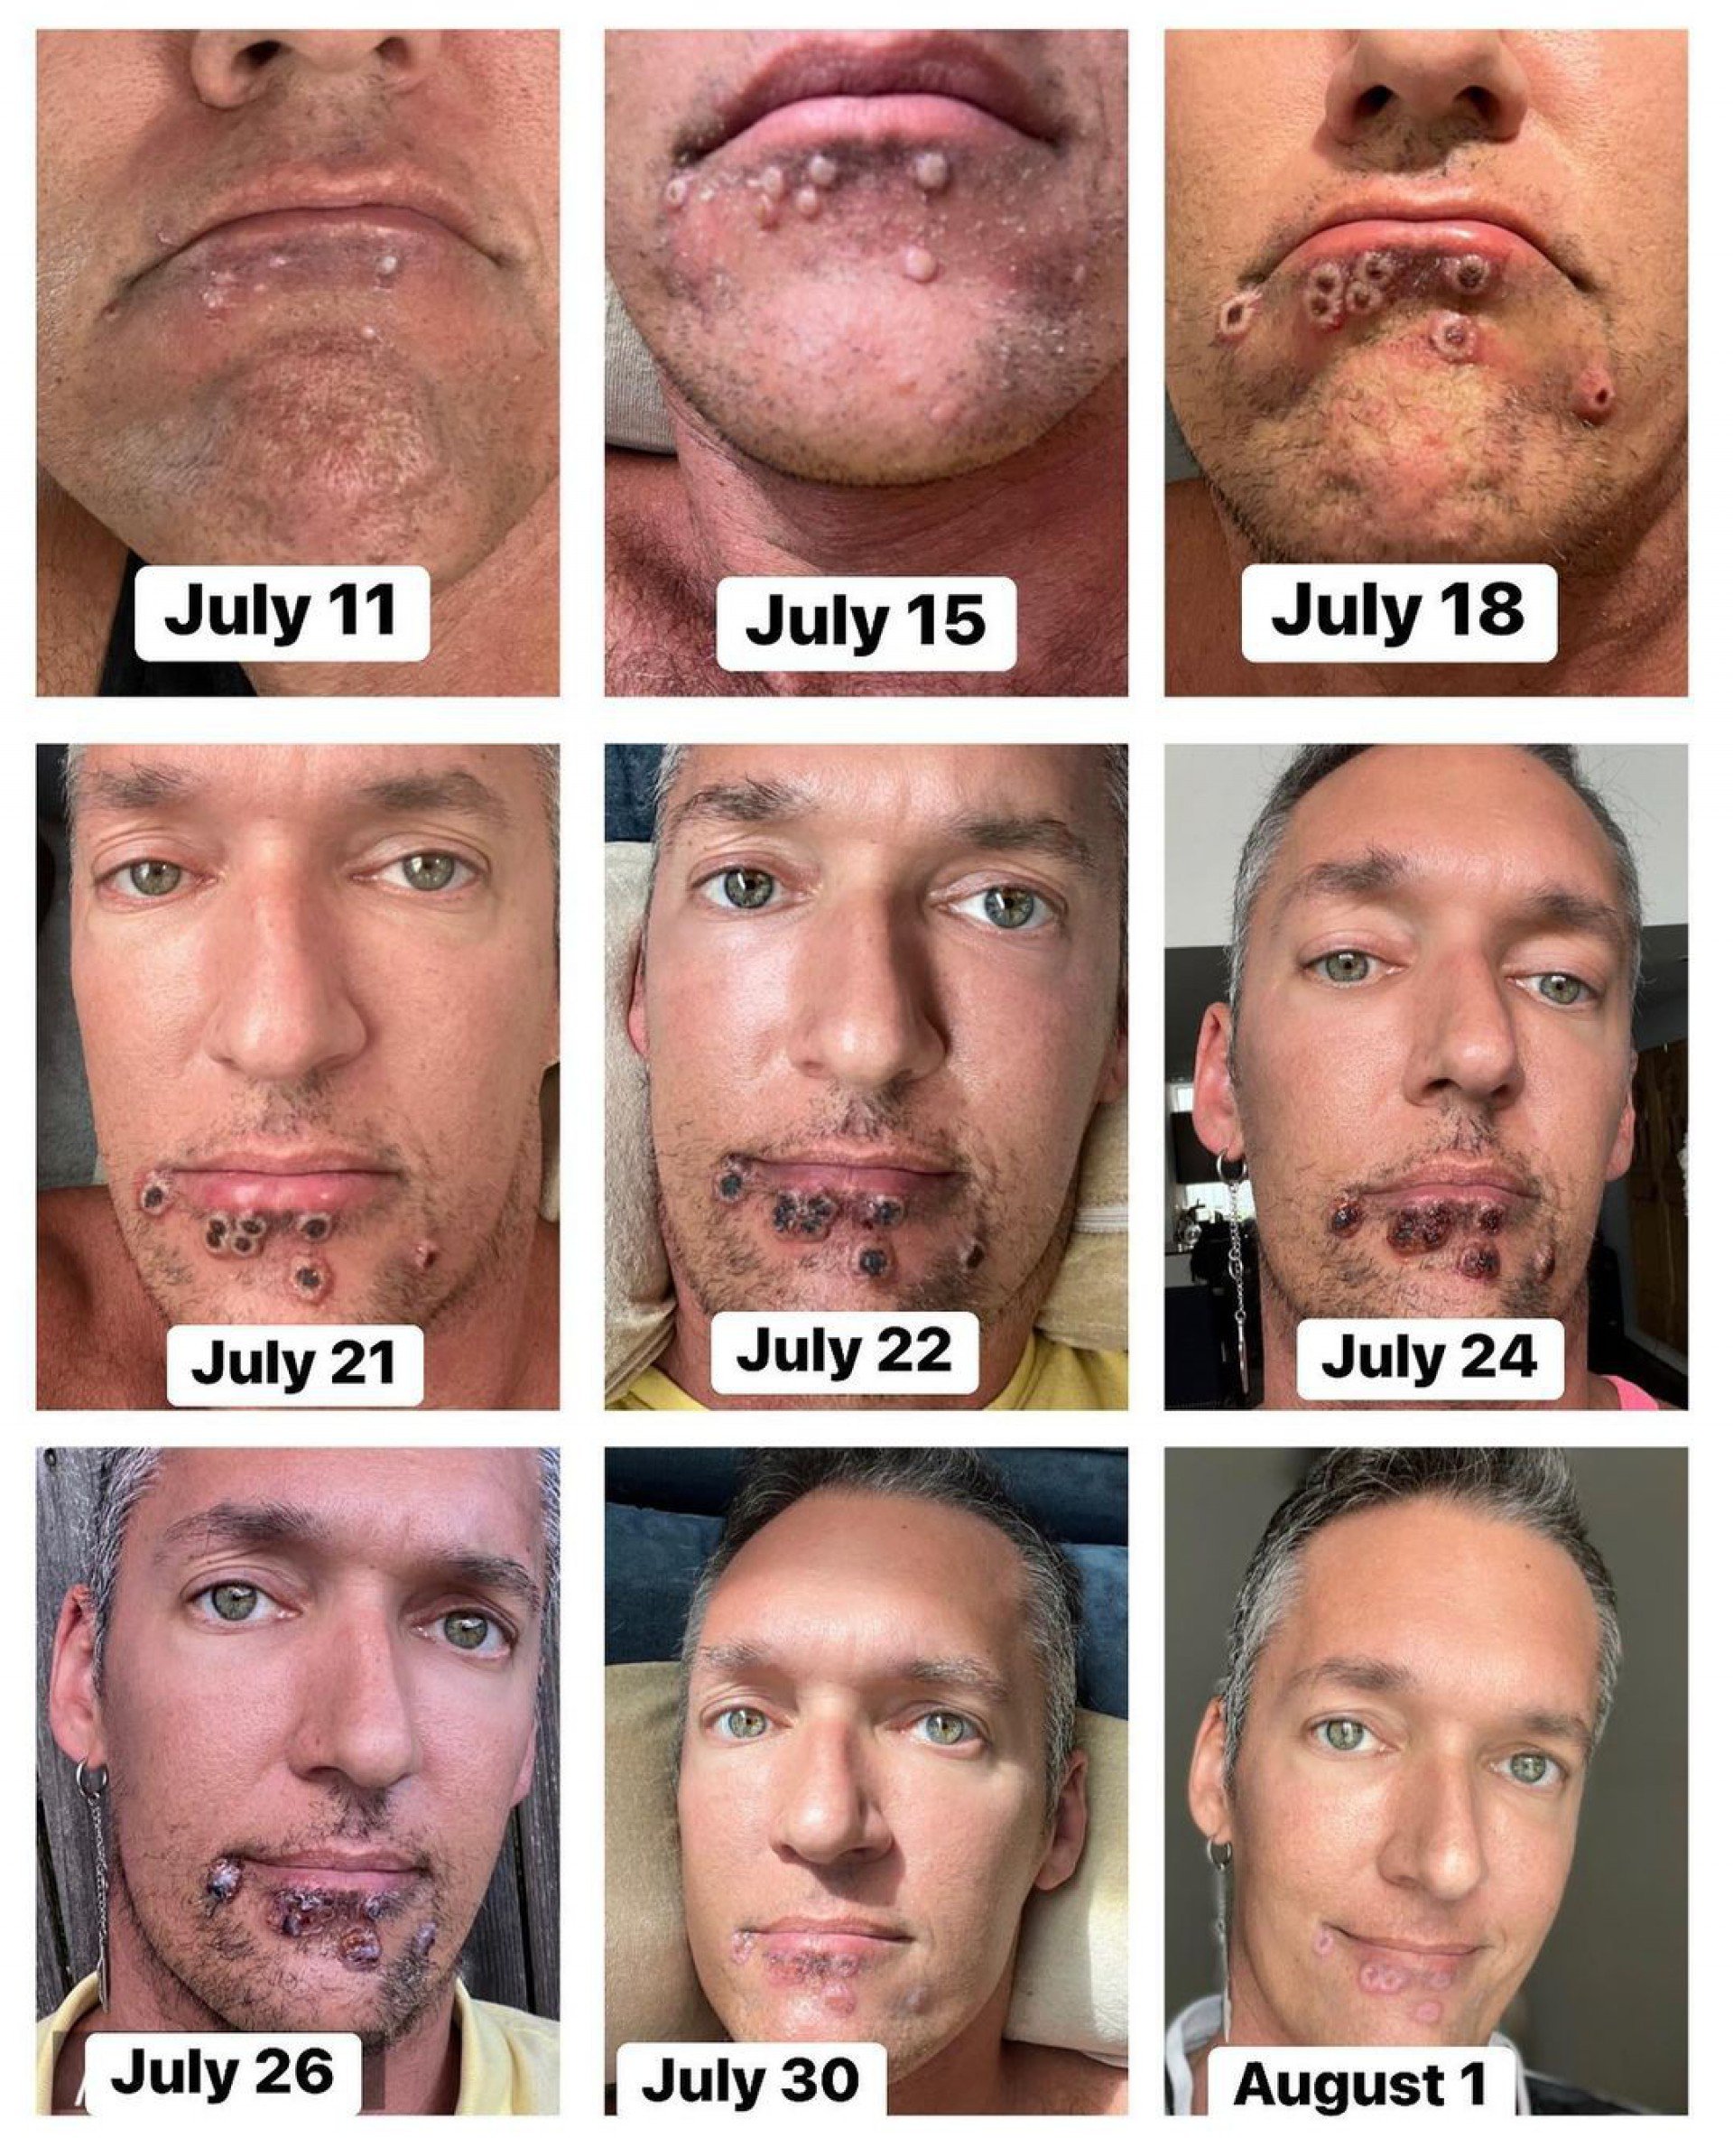 Porn Actor Silver Steele Shows The Evolution Of Monkey Smallpox In His Body